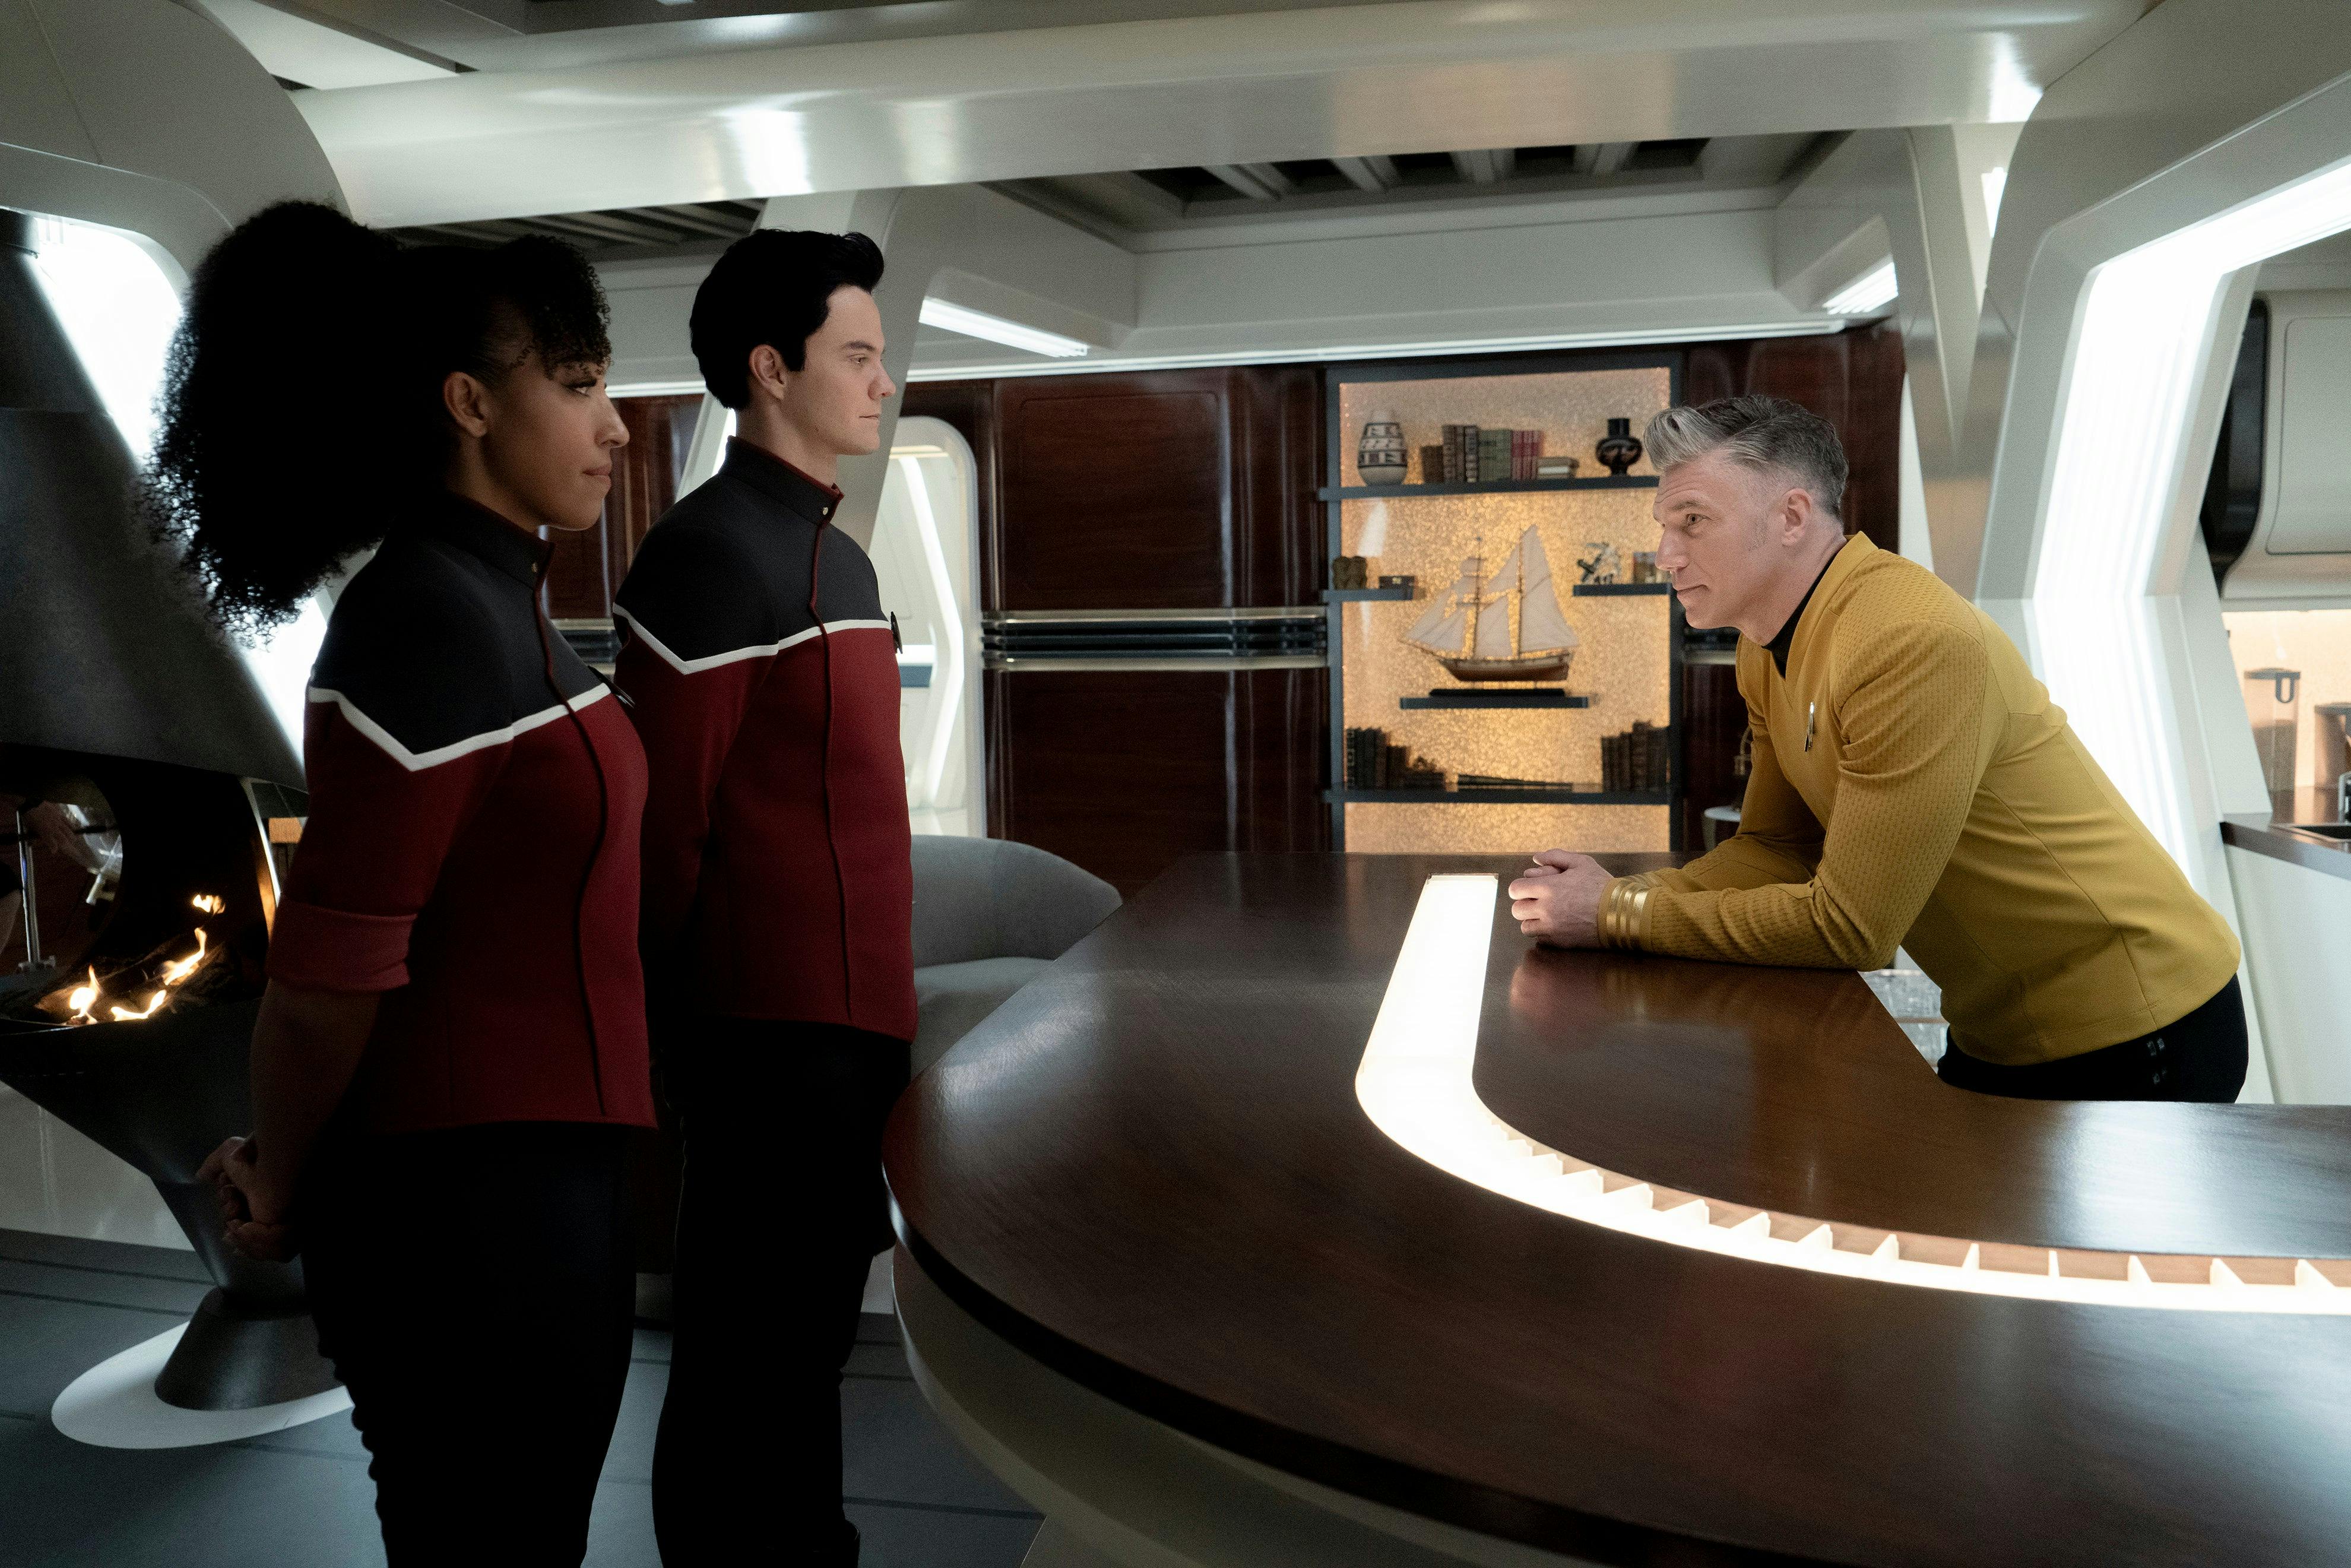 In his captain's quarters, Pike leans over his bar table and cautions Ensign Boimler and Mariner on the trouble they've caused in 'Those Old Scientists'